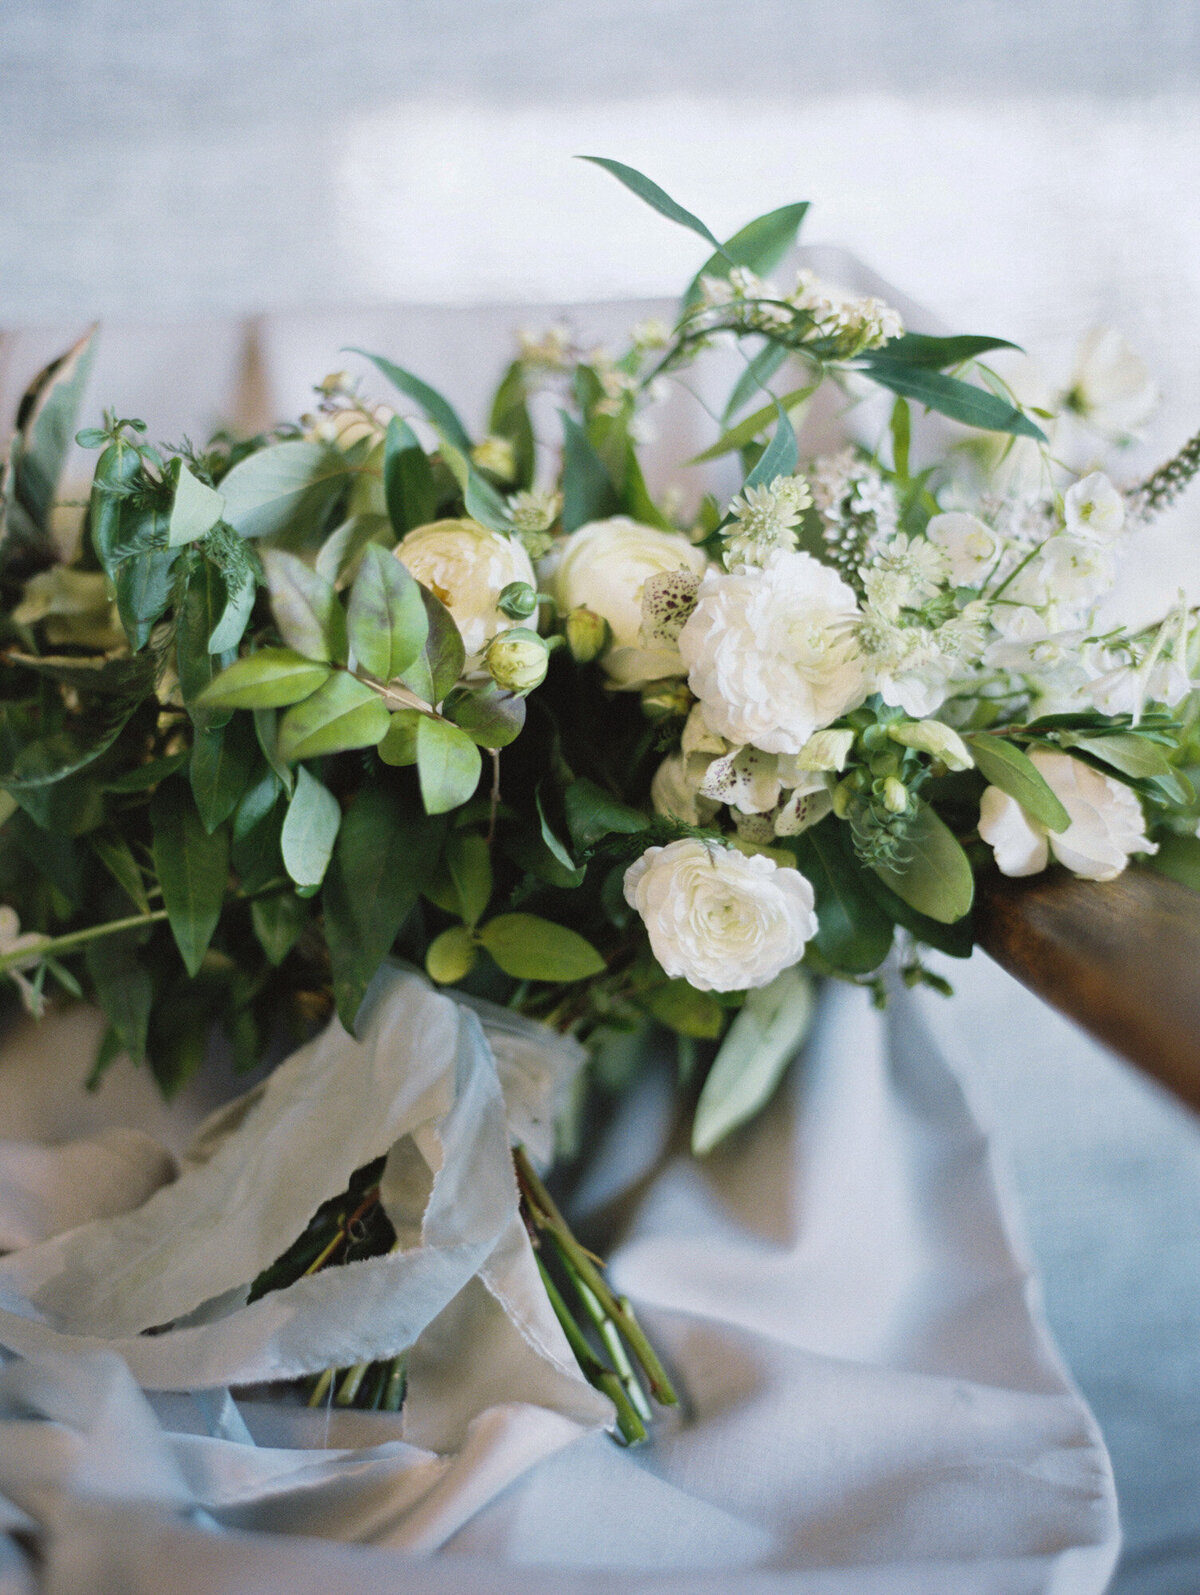 Bouquet of white roses and leaves placed on a wooden chair.